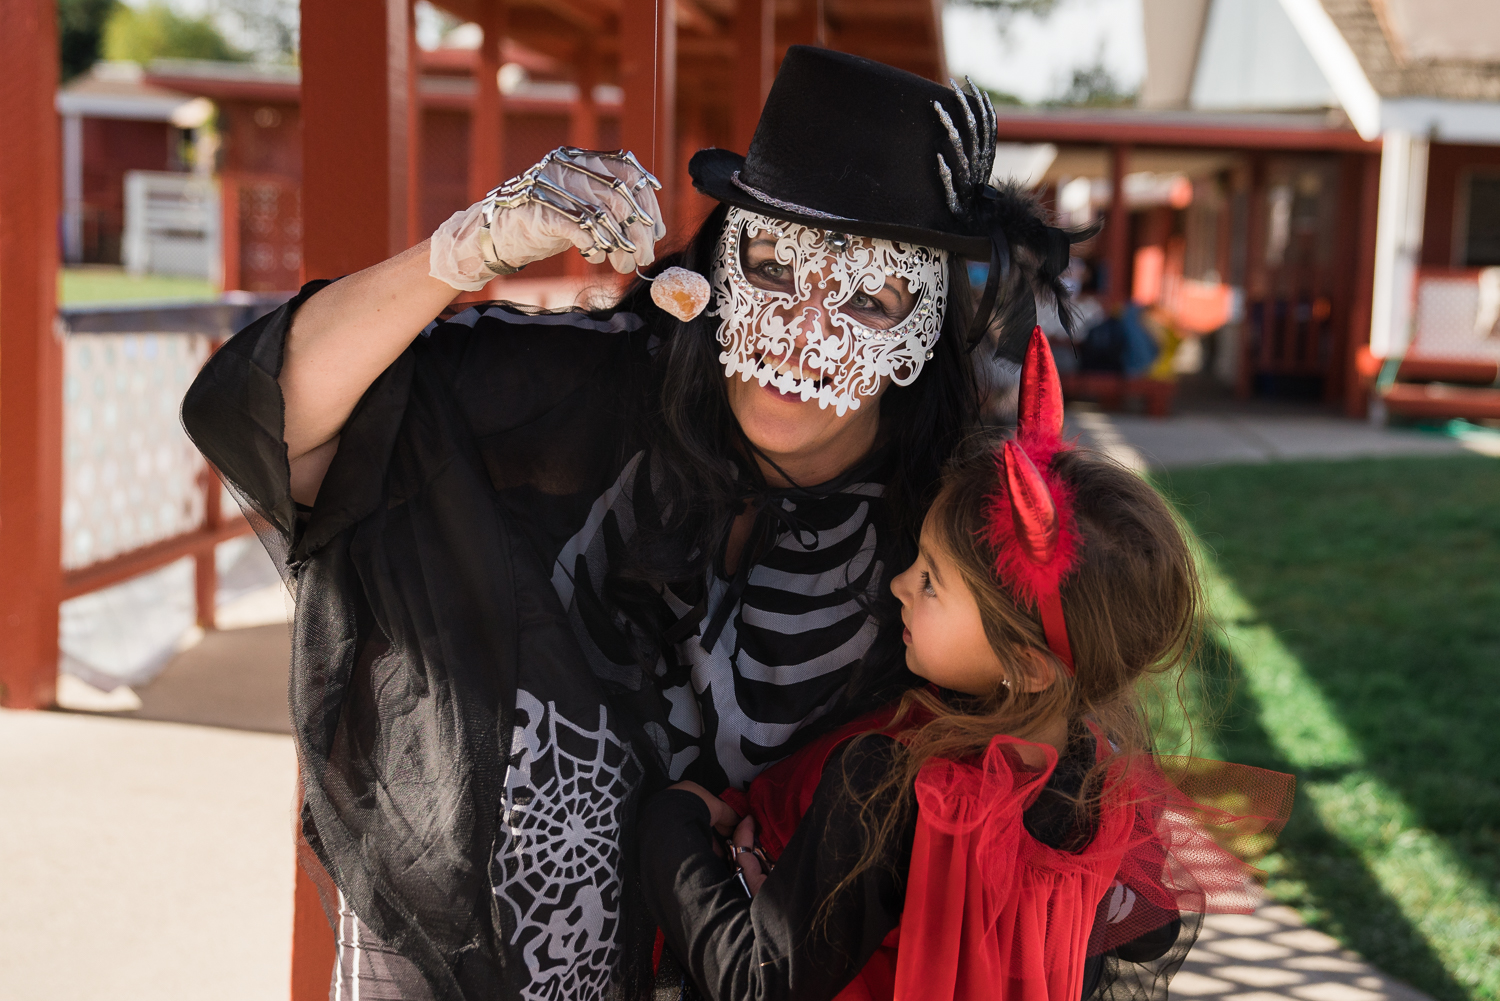 A woman in a lace skeleton mask and skeleton costume helps a young girl dressed like a devil to reach a donut hole hanging on a string.